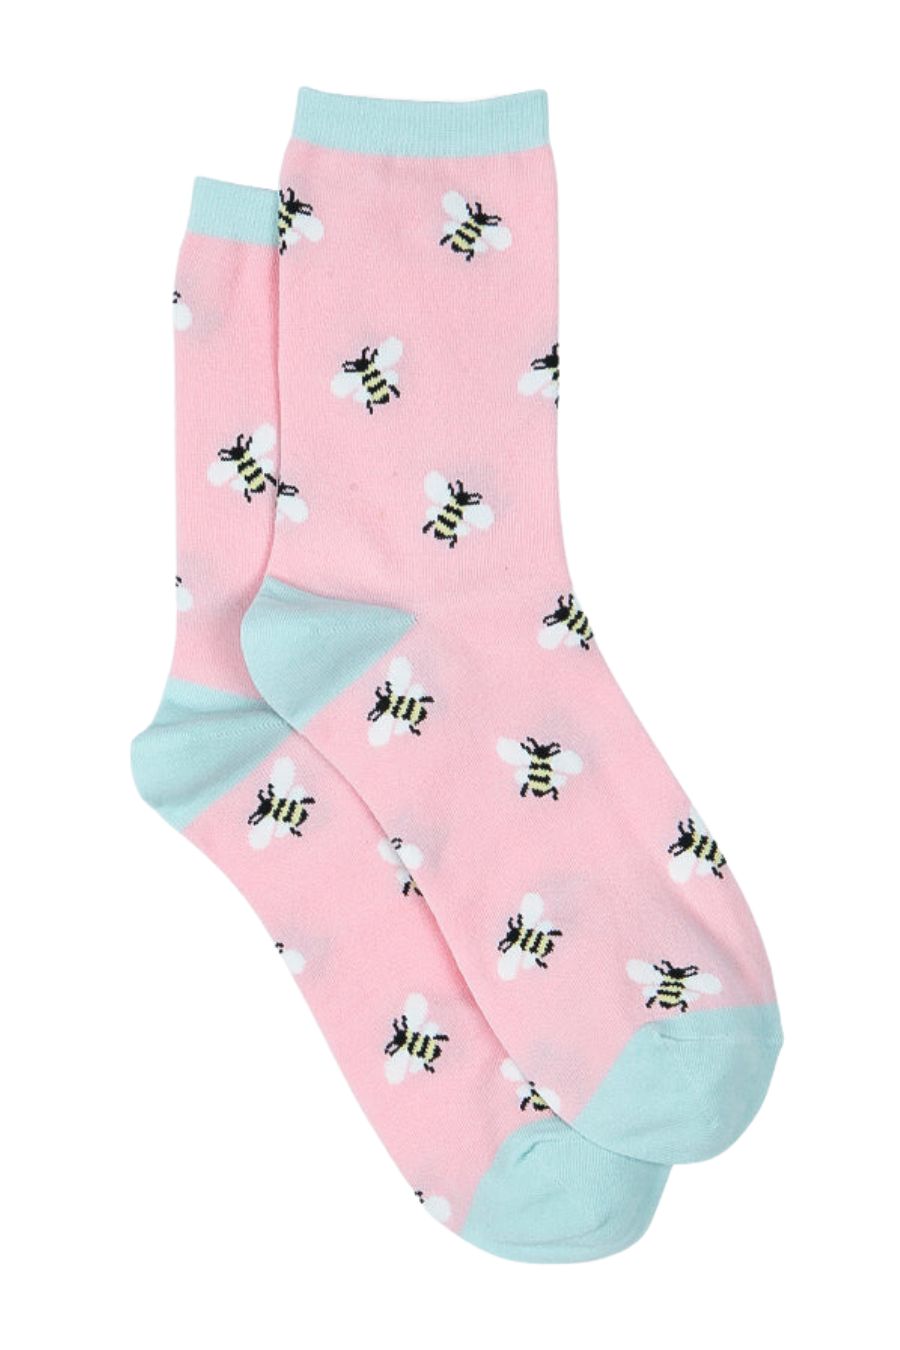 light pink, mint green ankle socks with bumblebees on them